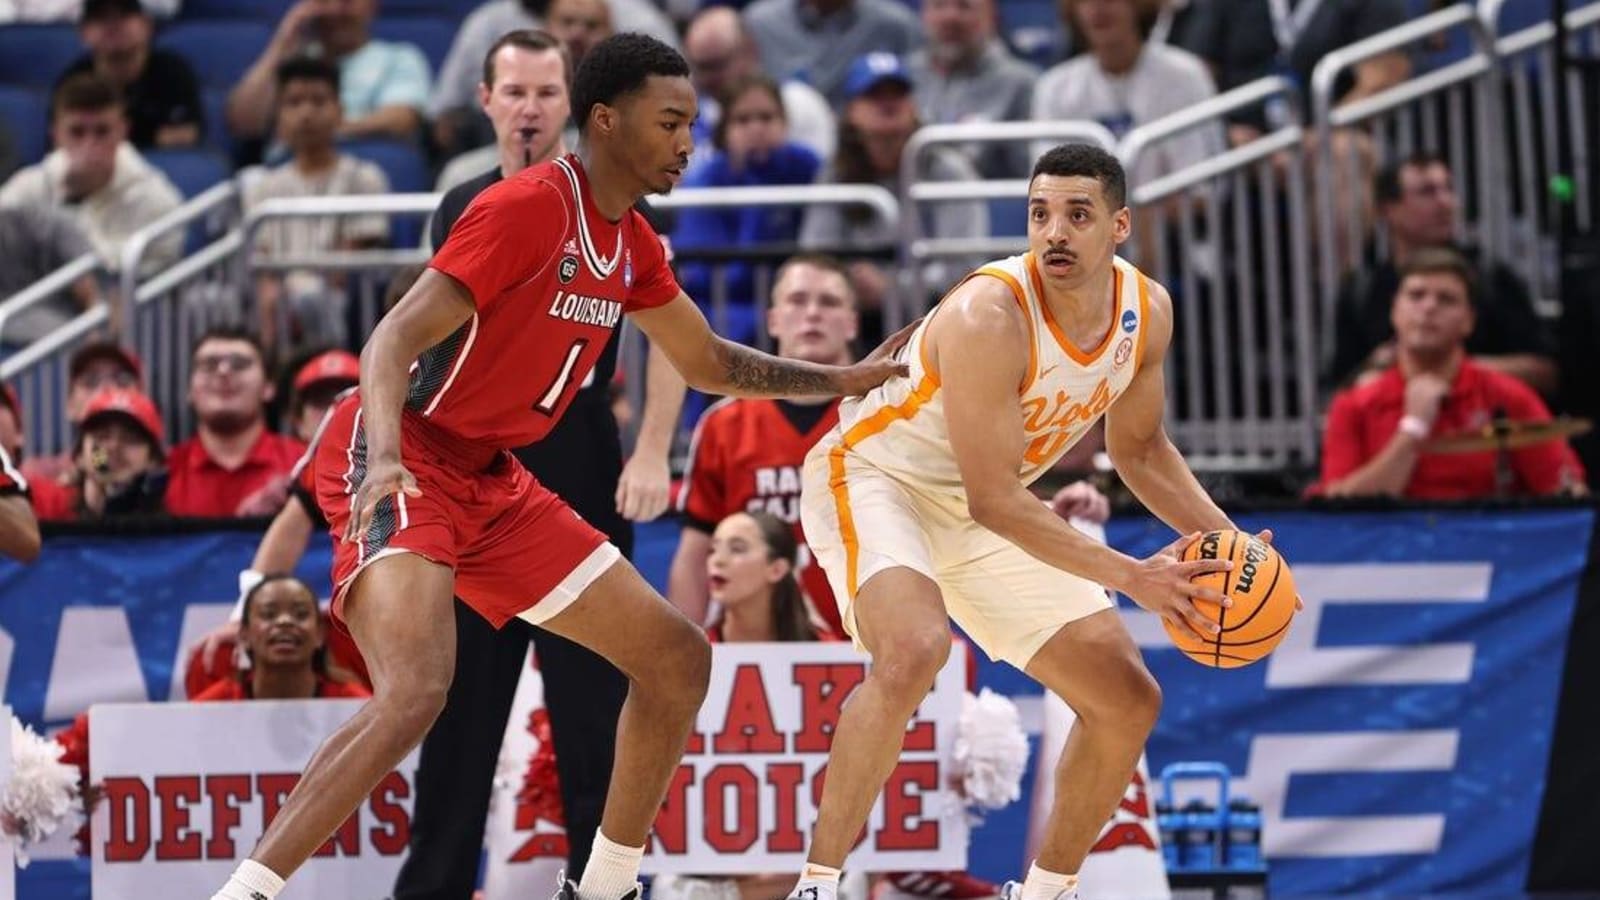 No. 4 Tennessee sweats out win over No. 13 Louisiana